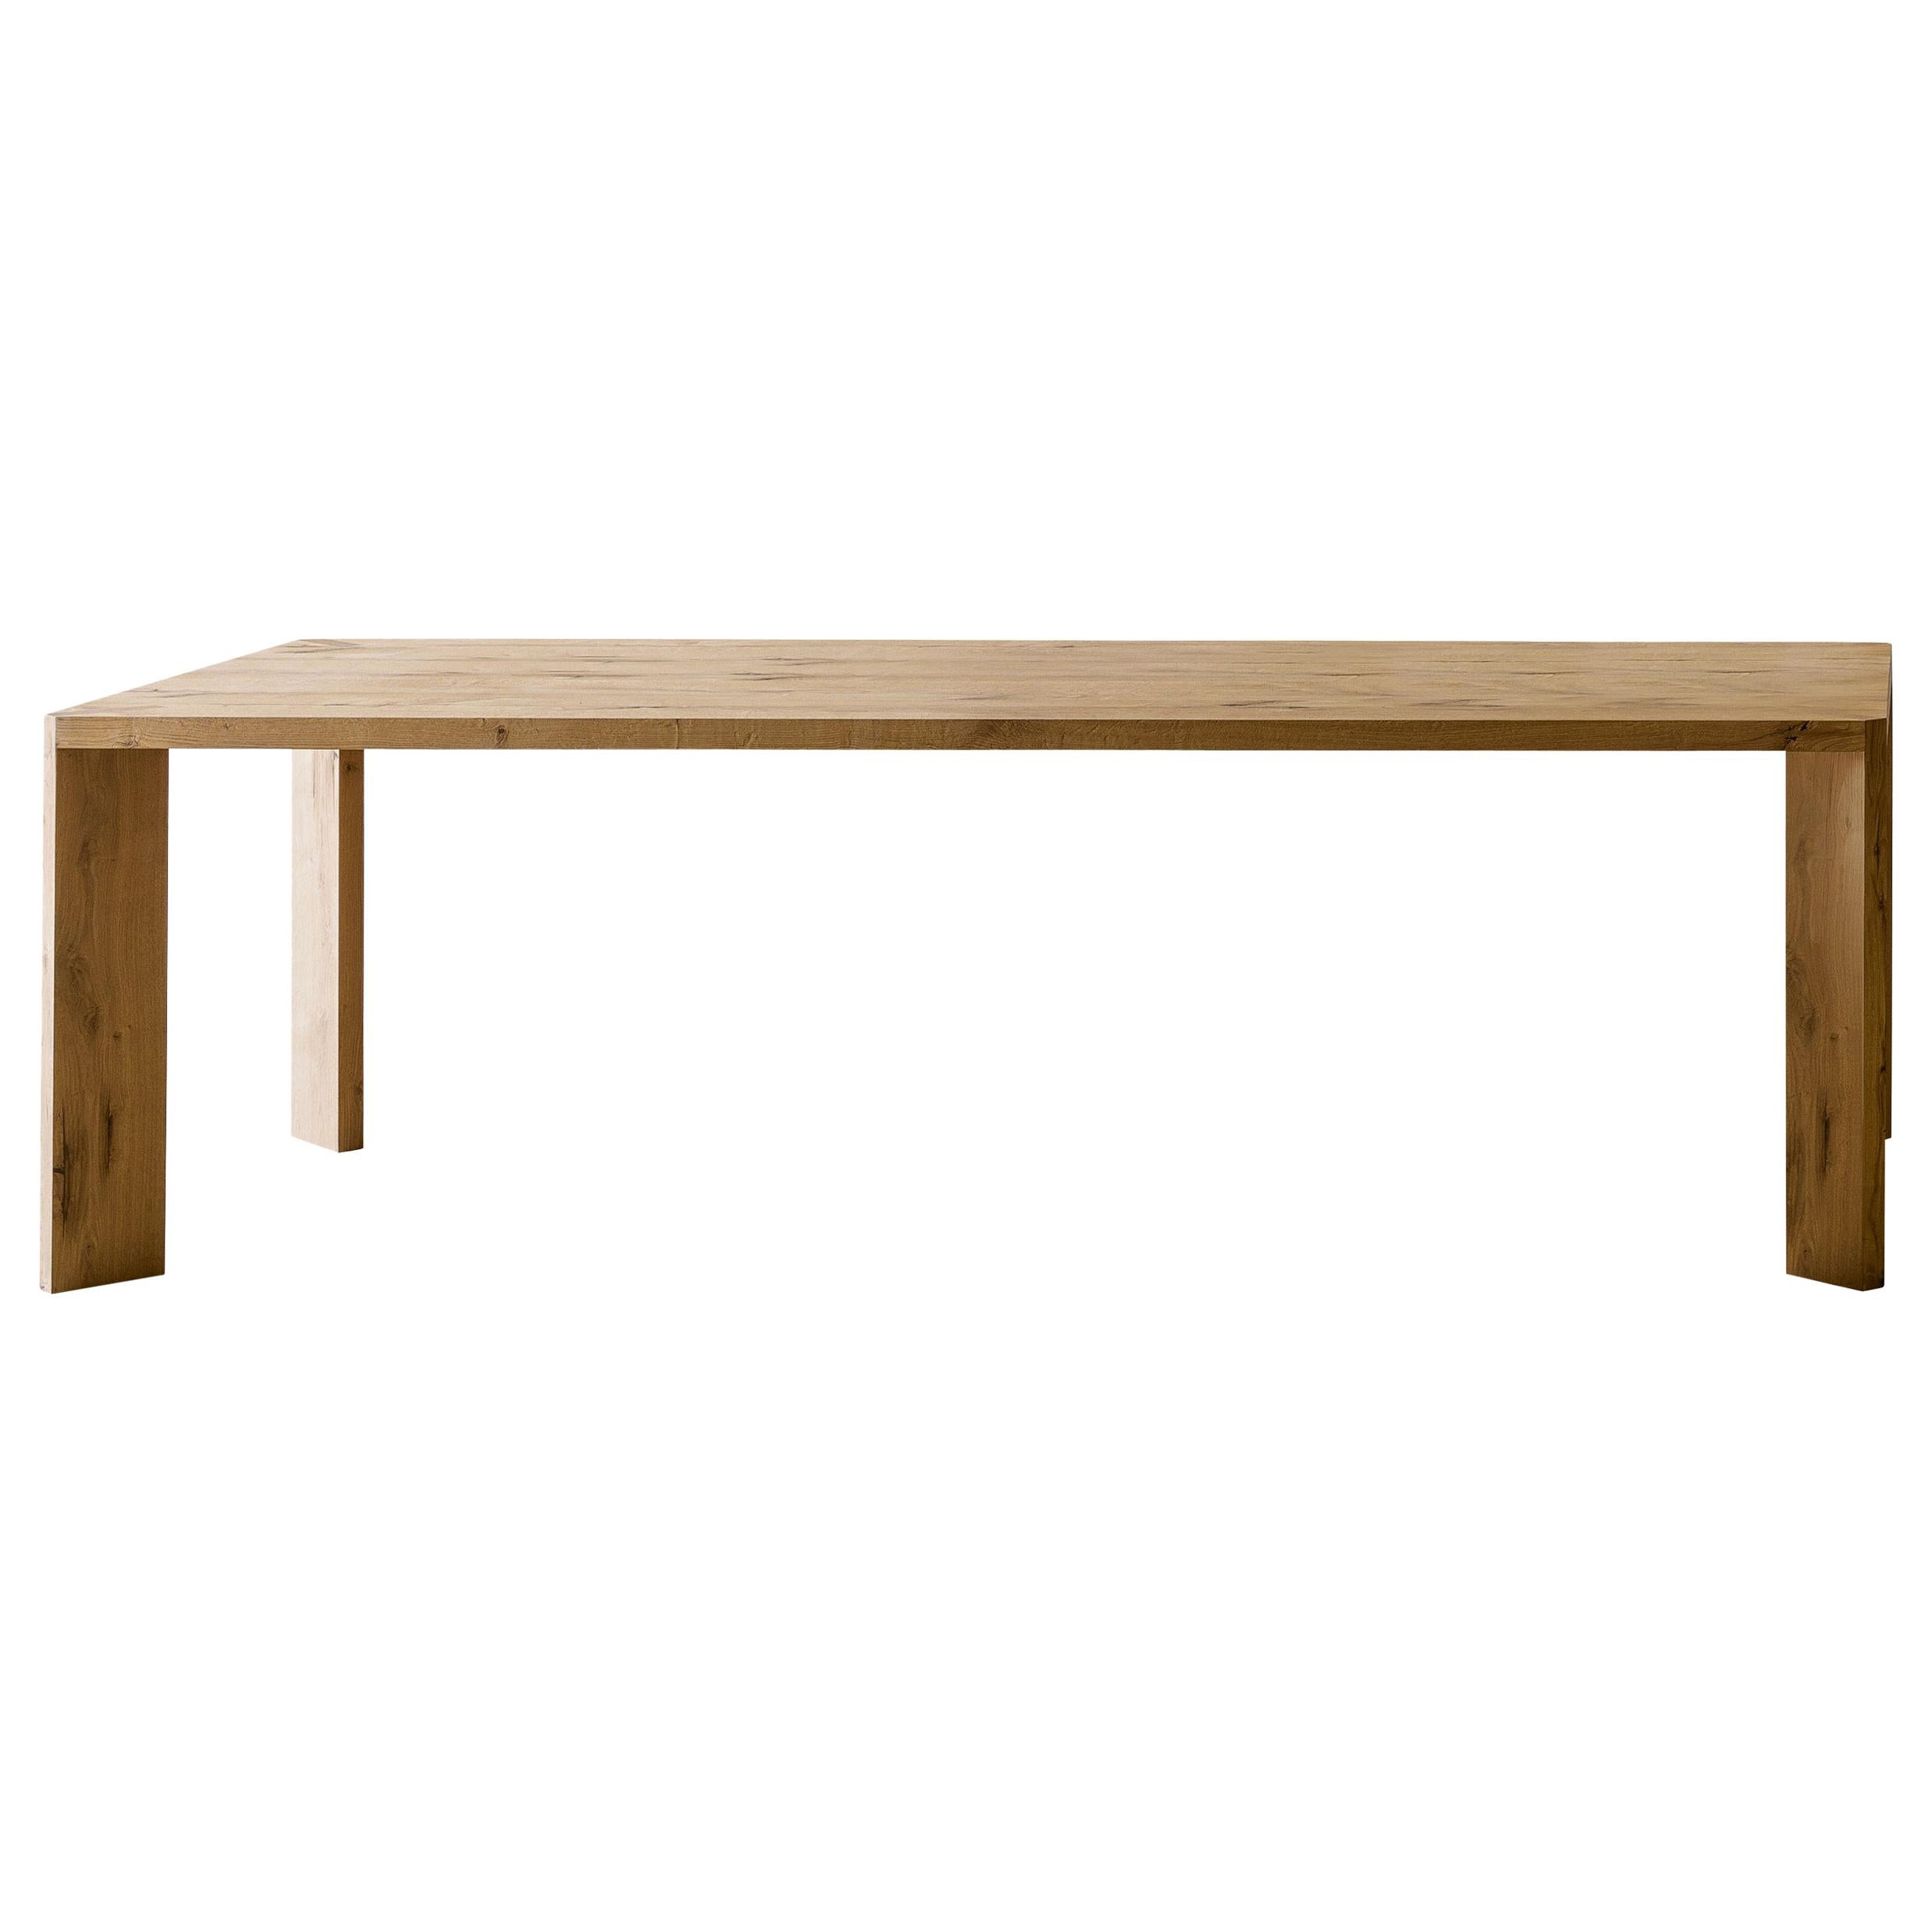 Manero Small Table in Vintage Oak by Paolo Cappello For Sale